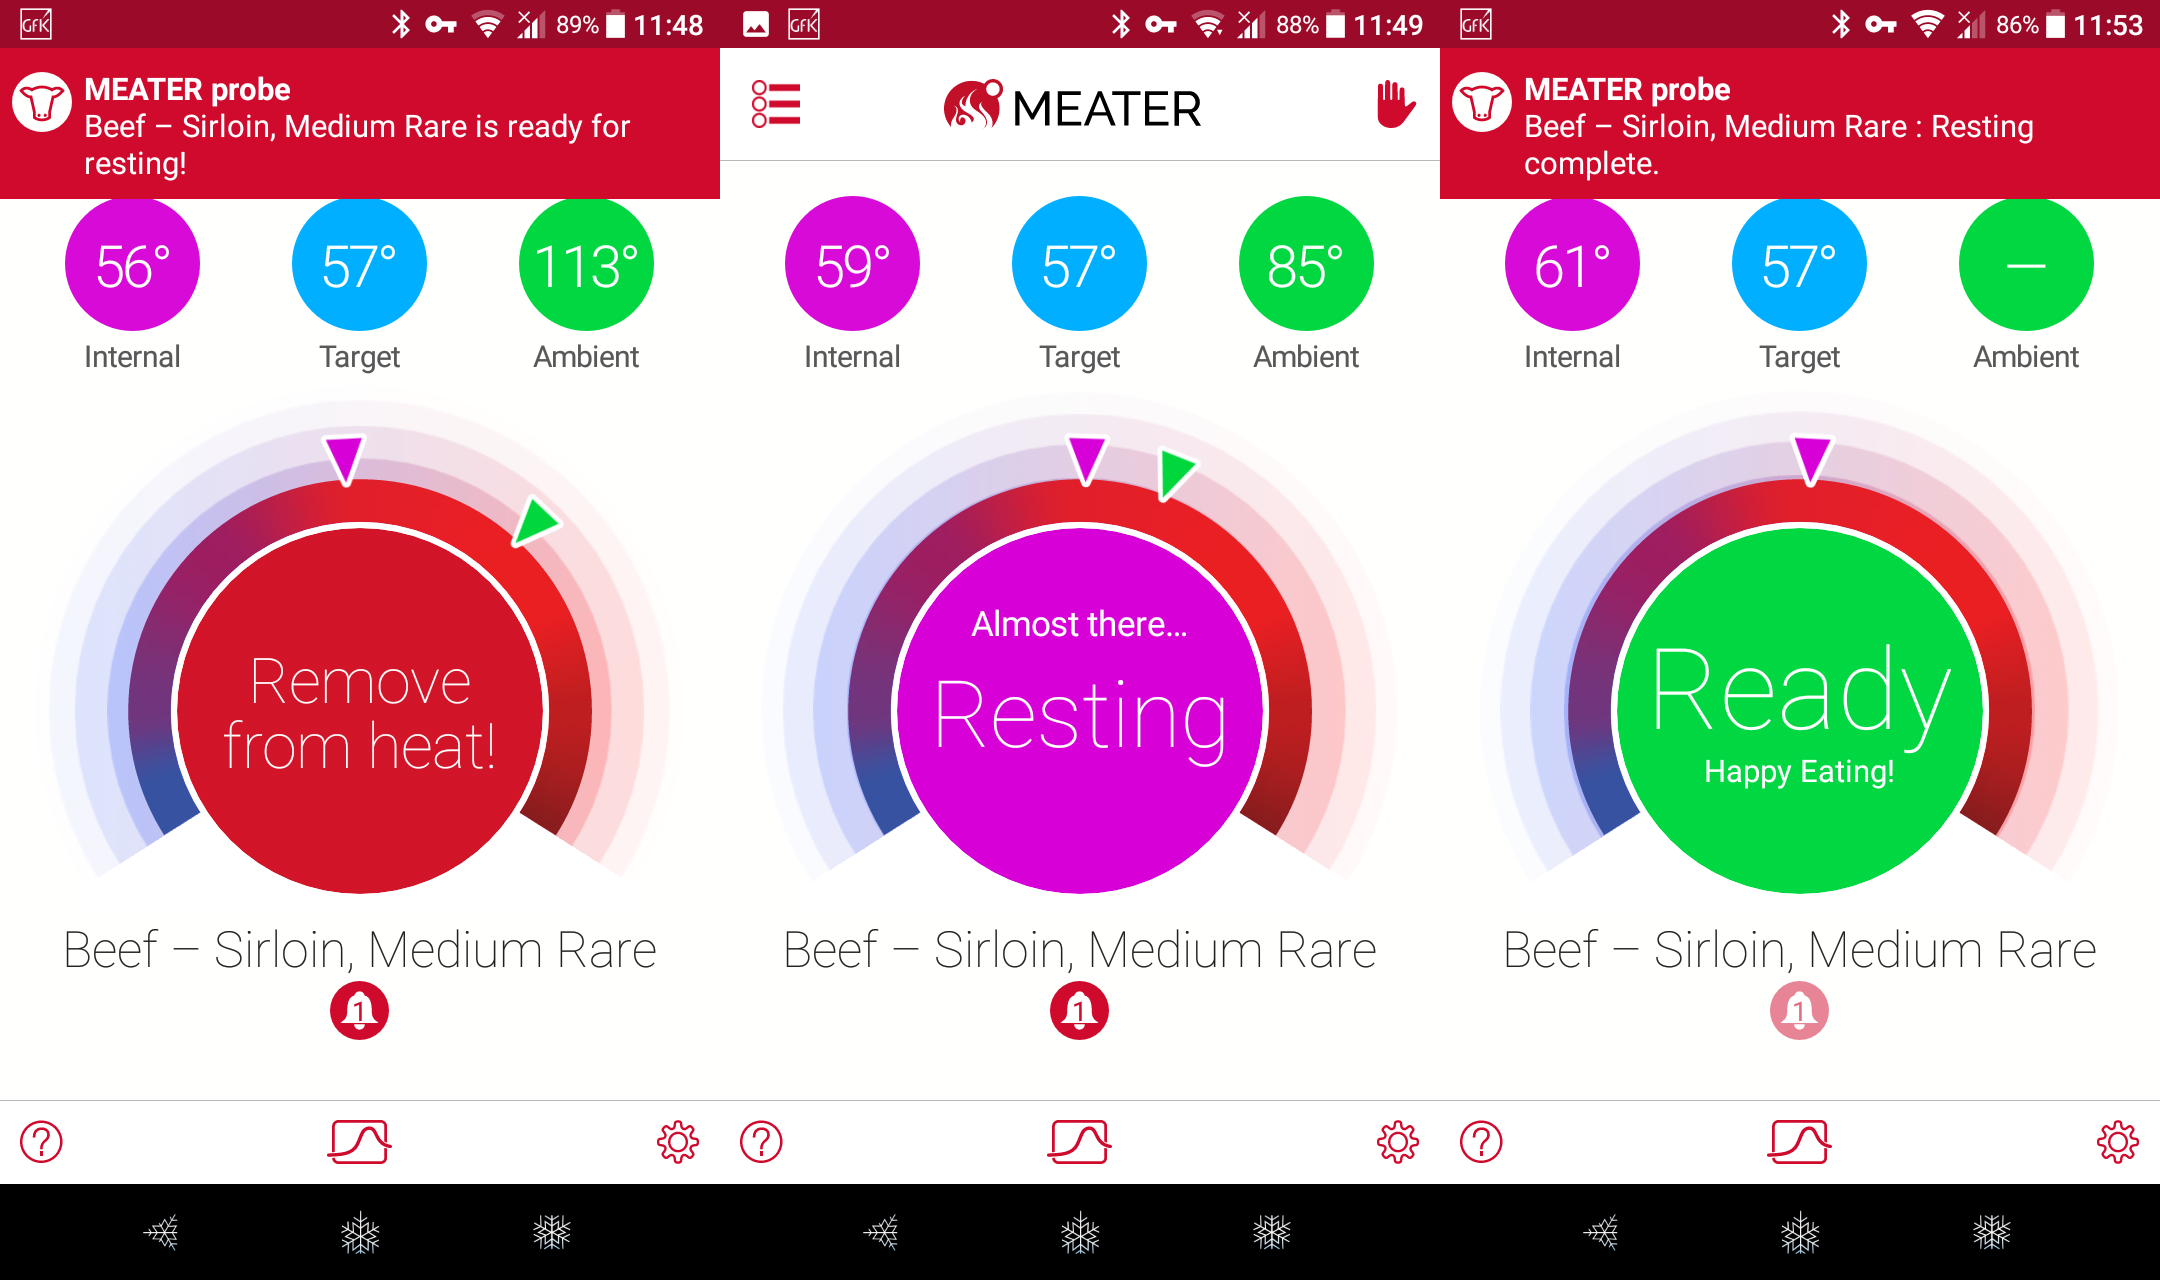 Screenshots of Meater app stages for cooking sirloin to medium rare.